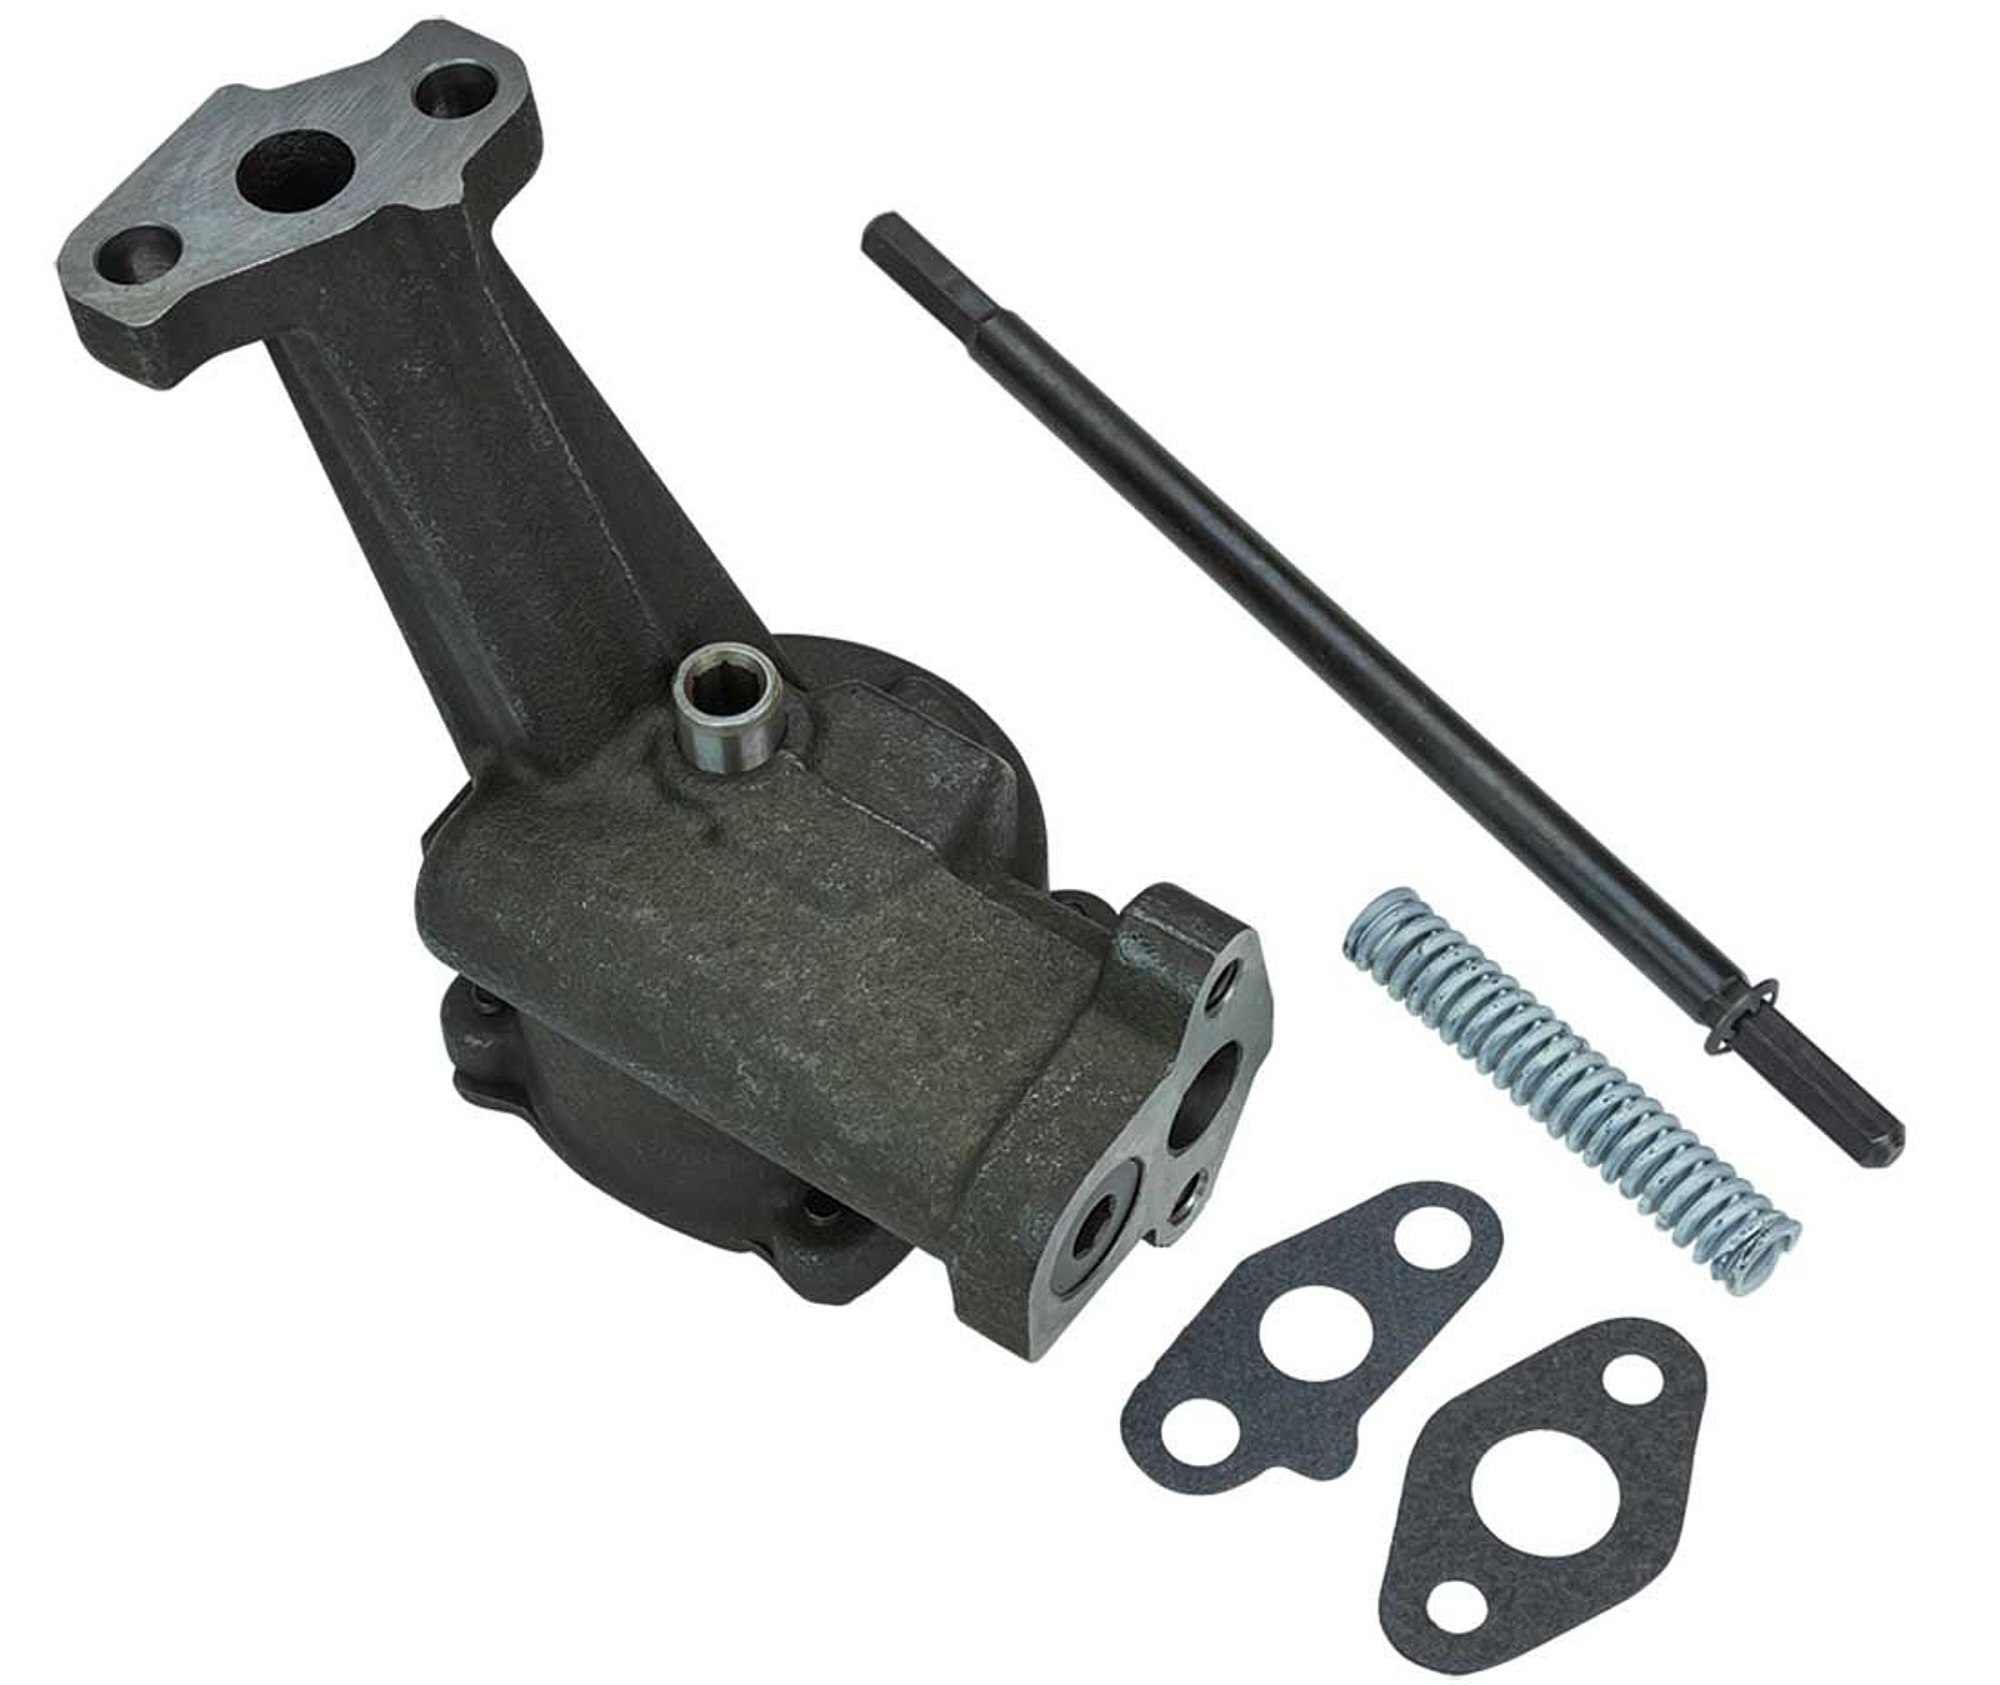 Moroso 22153 Oil Pump, Wet Sump, Internal, High Volume, Standard Pressure, Gaskets / Spring / Shaft Included, Small Block Ford, Each